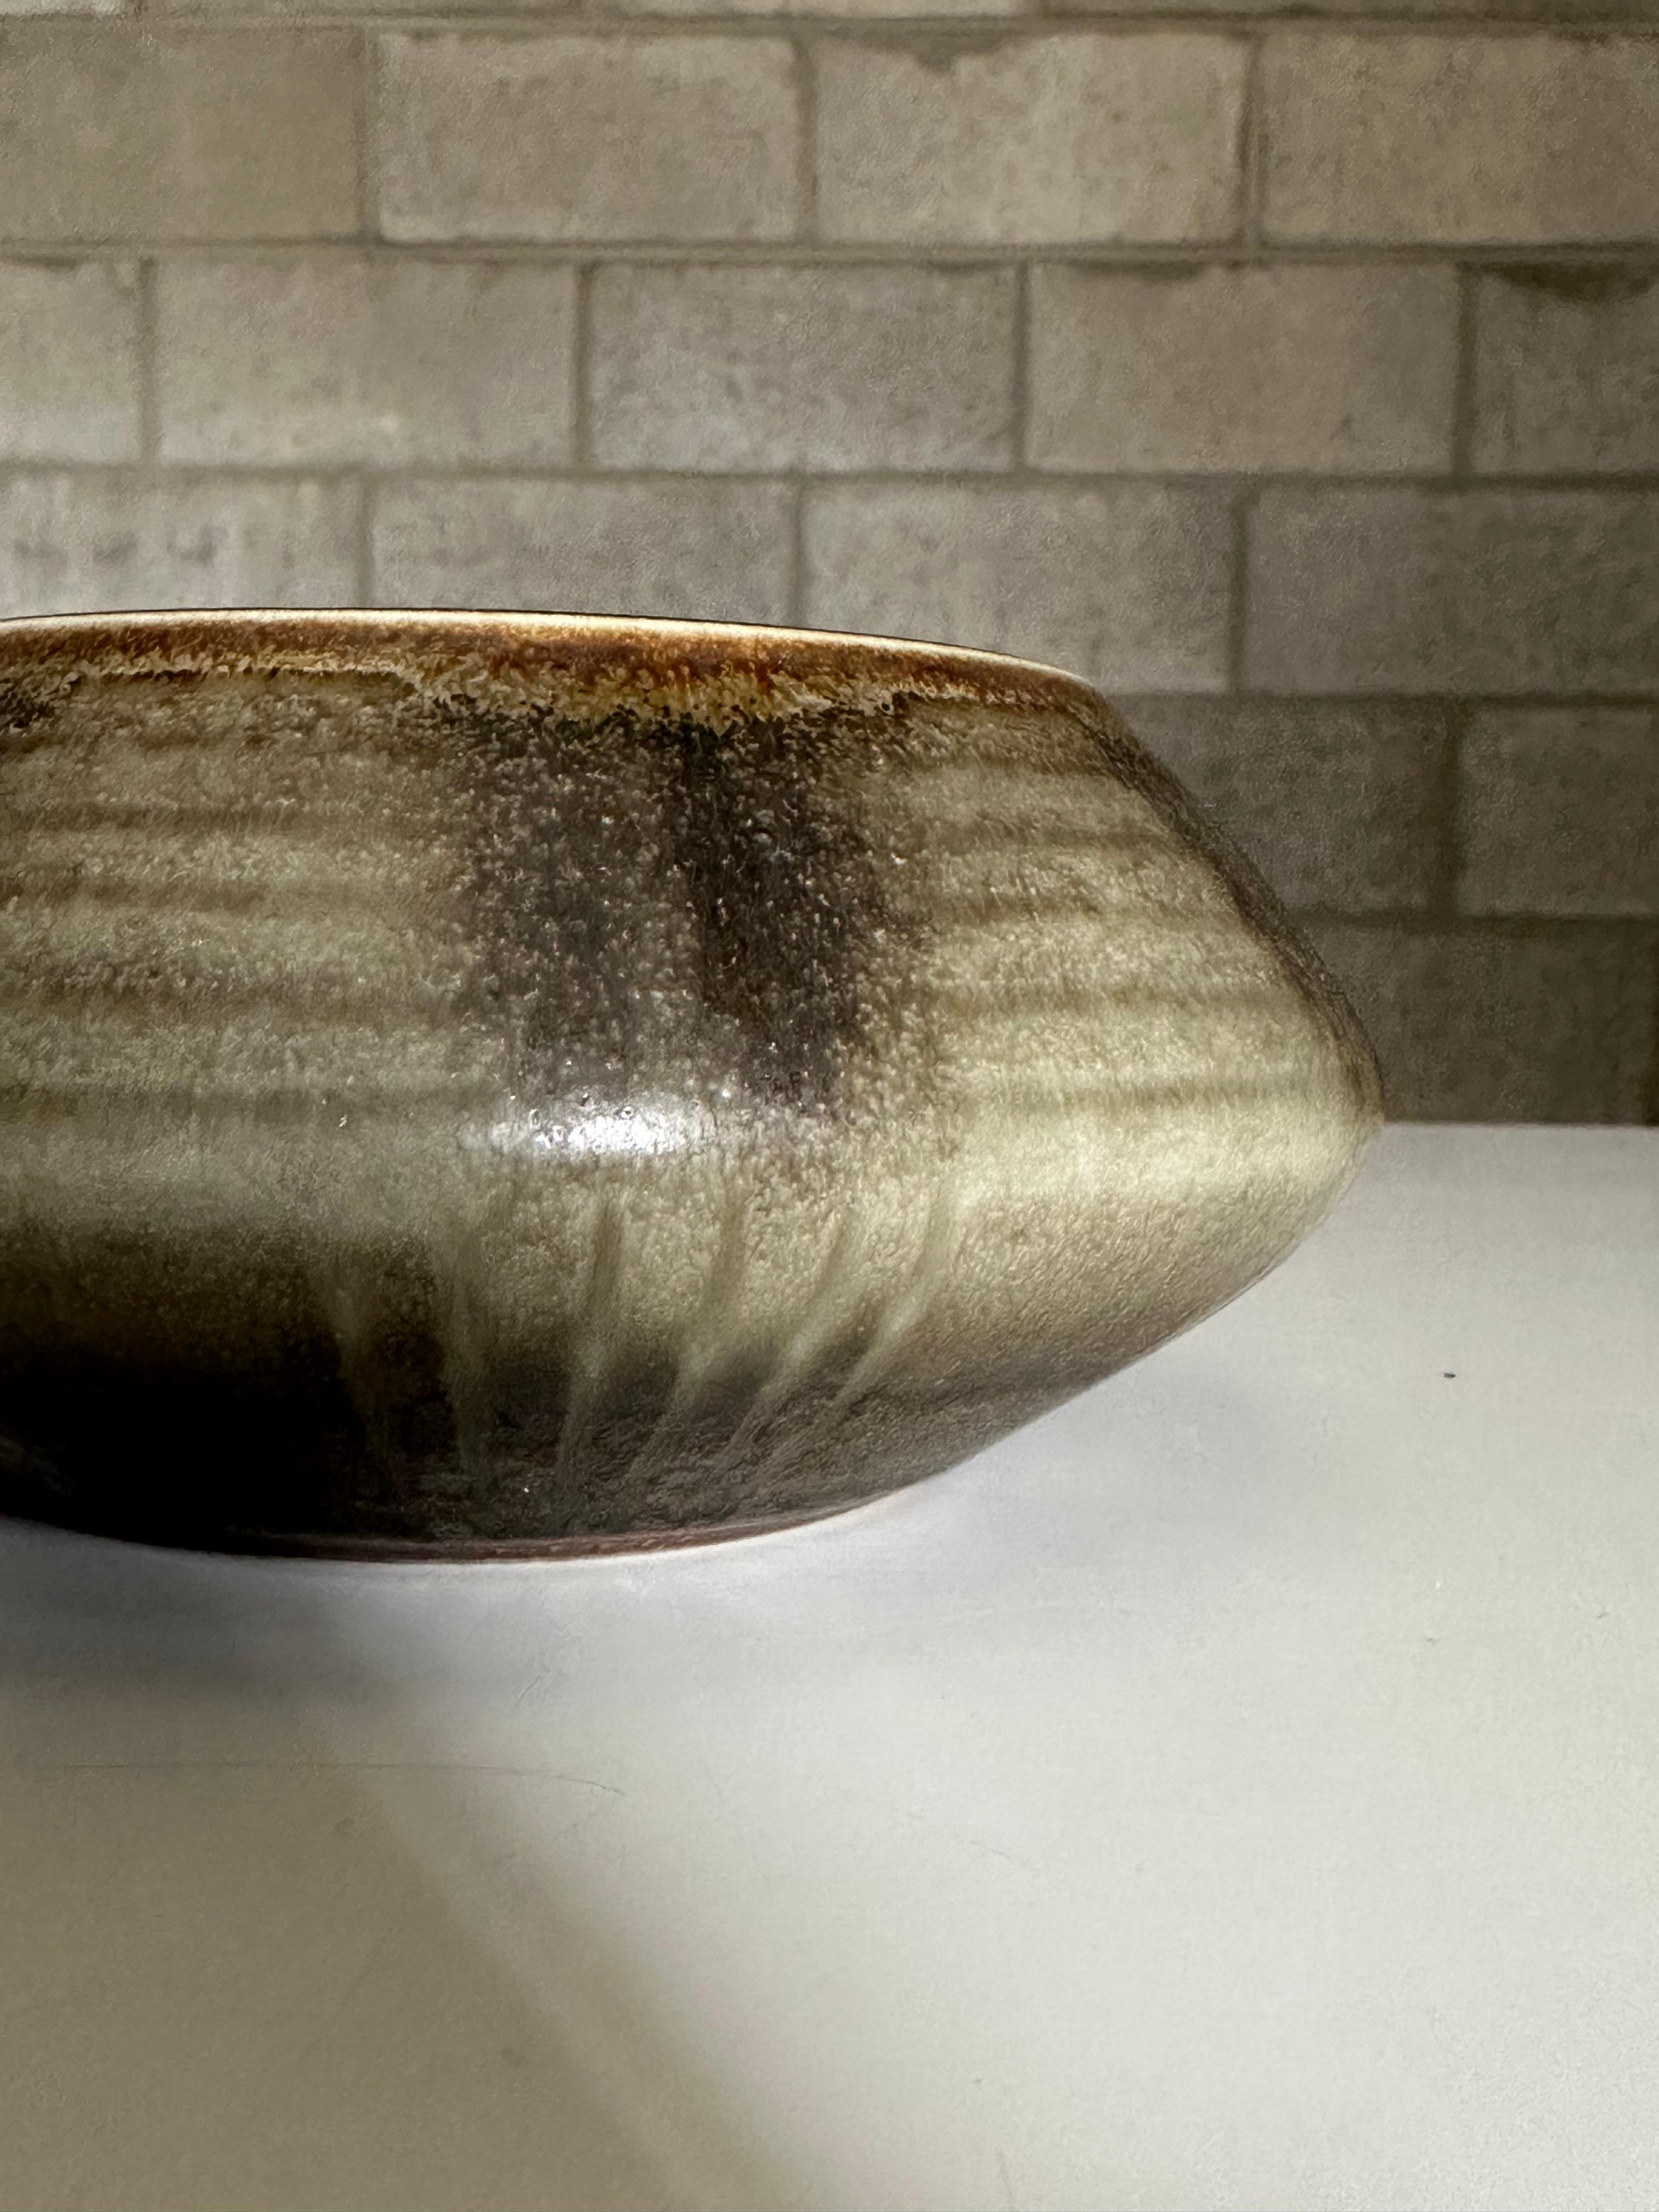 A ceramic bowl by Carl Harry Stålhane for Rörstrand. Features natural earth tones in green, tan, and light brown. Great beautiful and subtle decorative pattern. Well proportioned would allow for use as a decorative bowl or a low wide vase. 